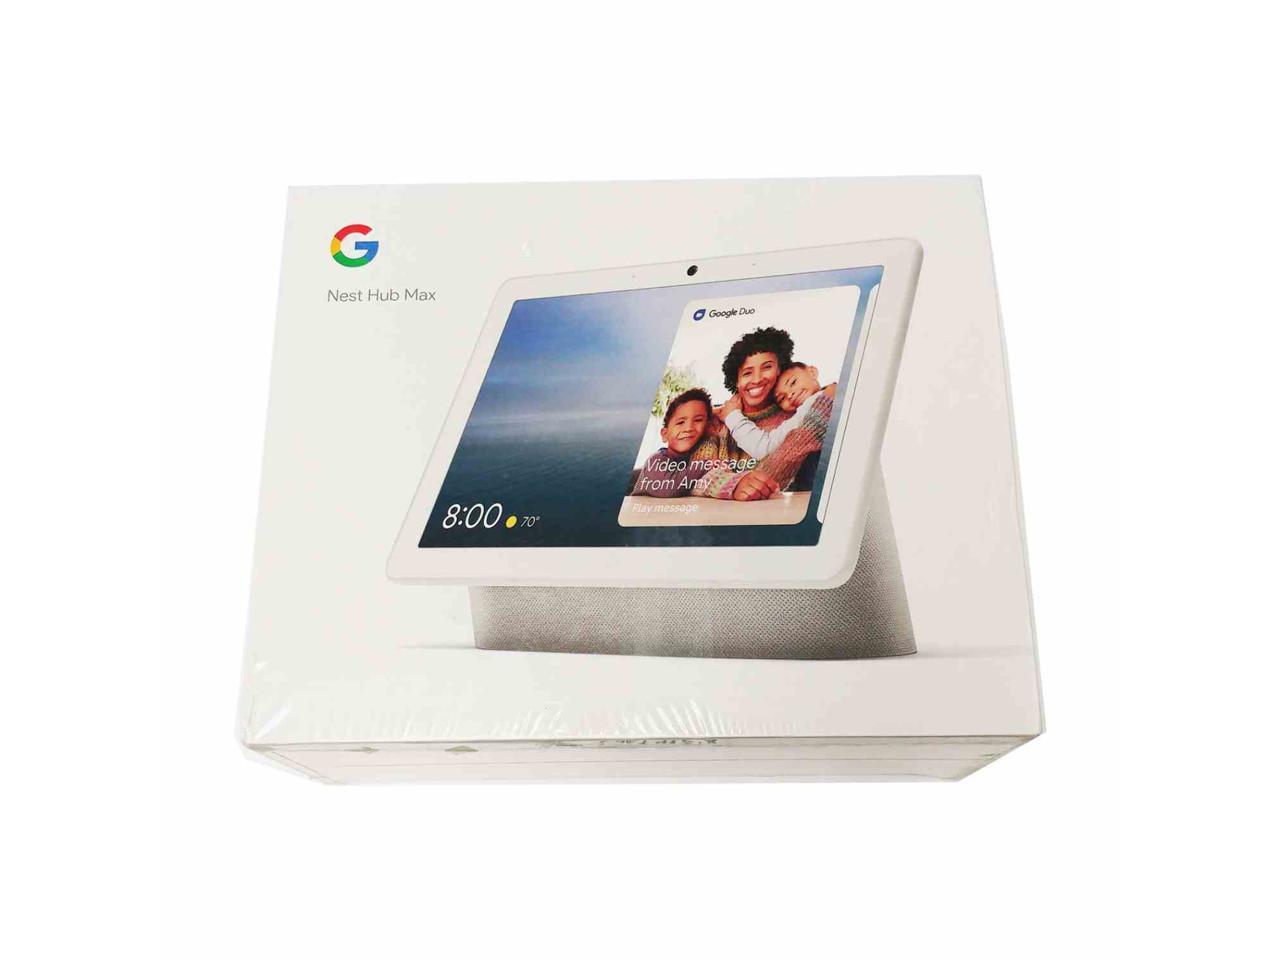 GA00426-US Chalk Google Nest Hub Max with Built-in Google Assistant 